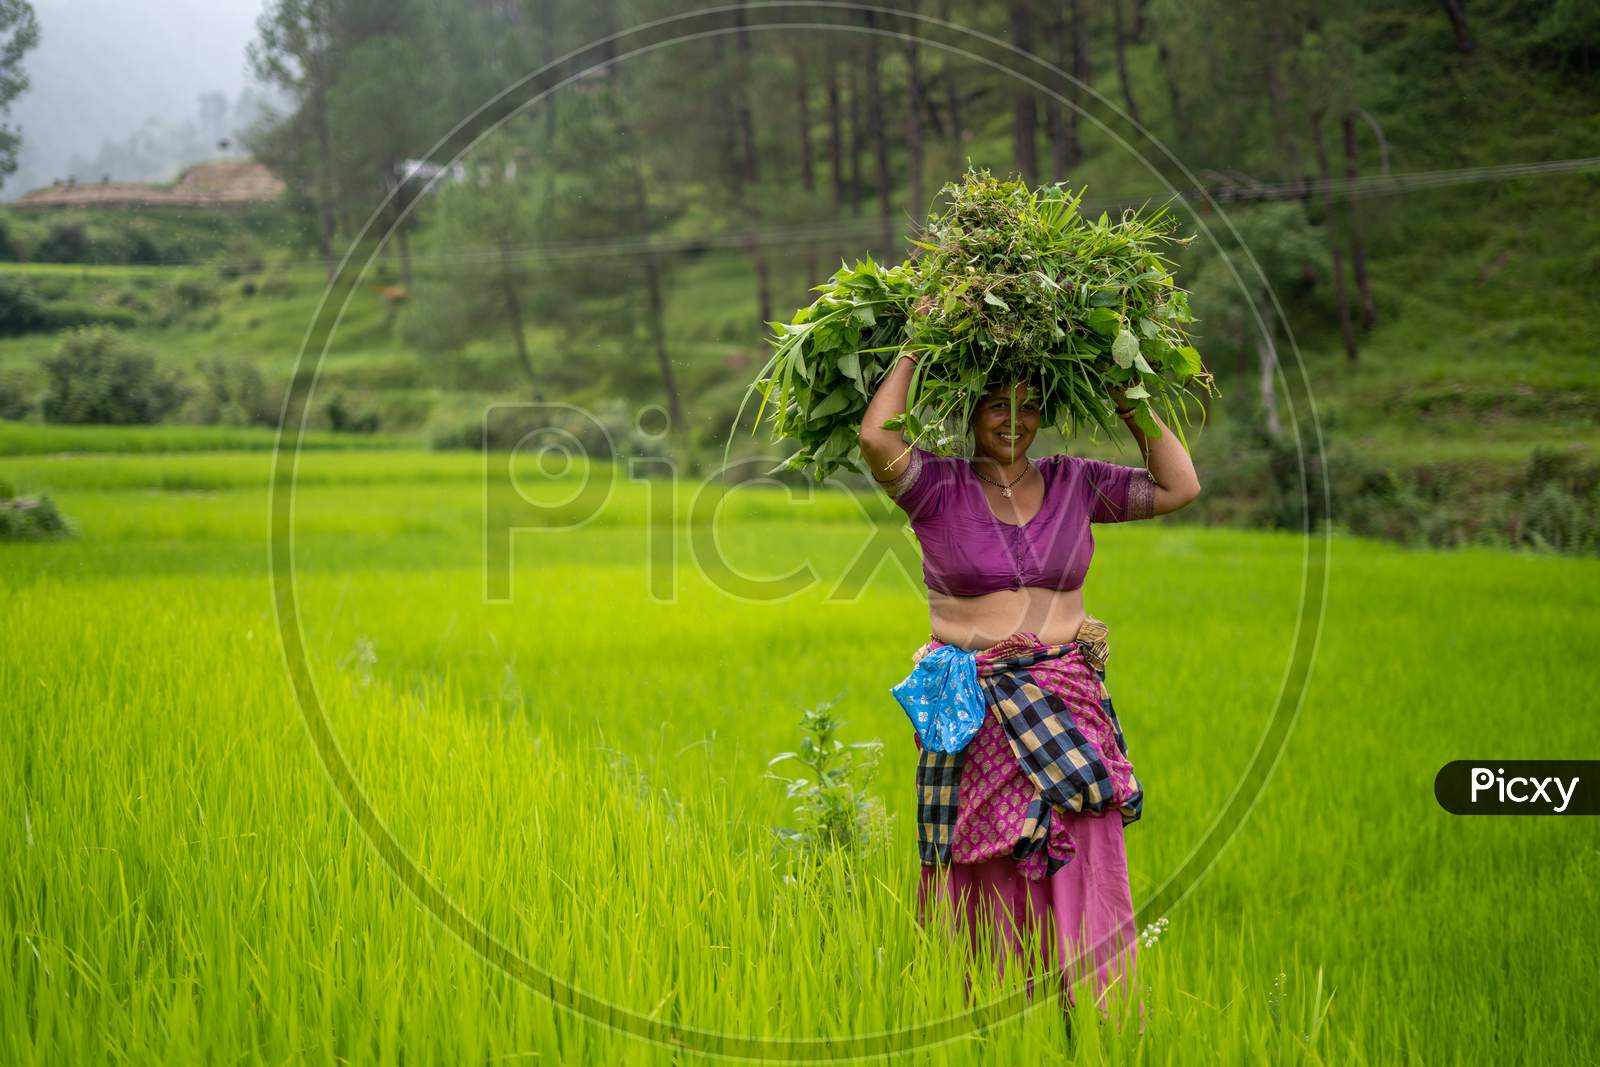 Indian Woman Working In The Irrigated Green Fields.